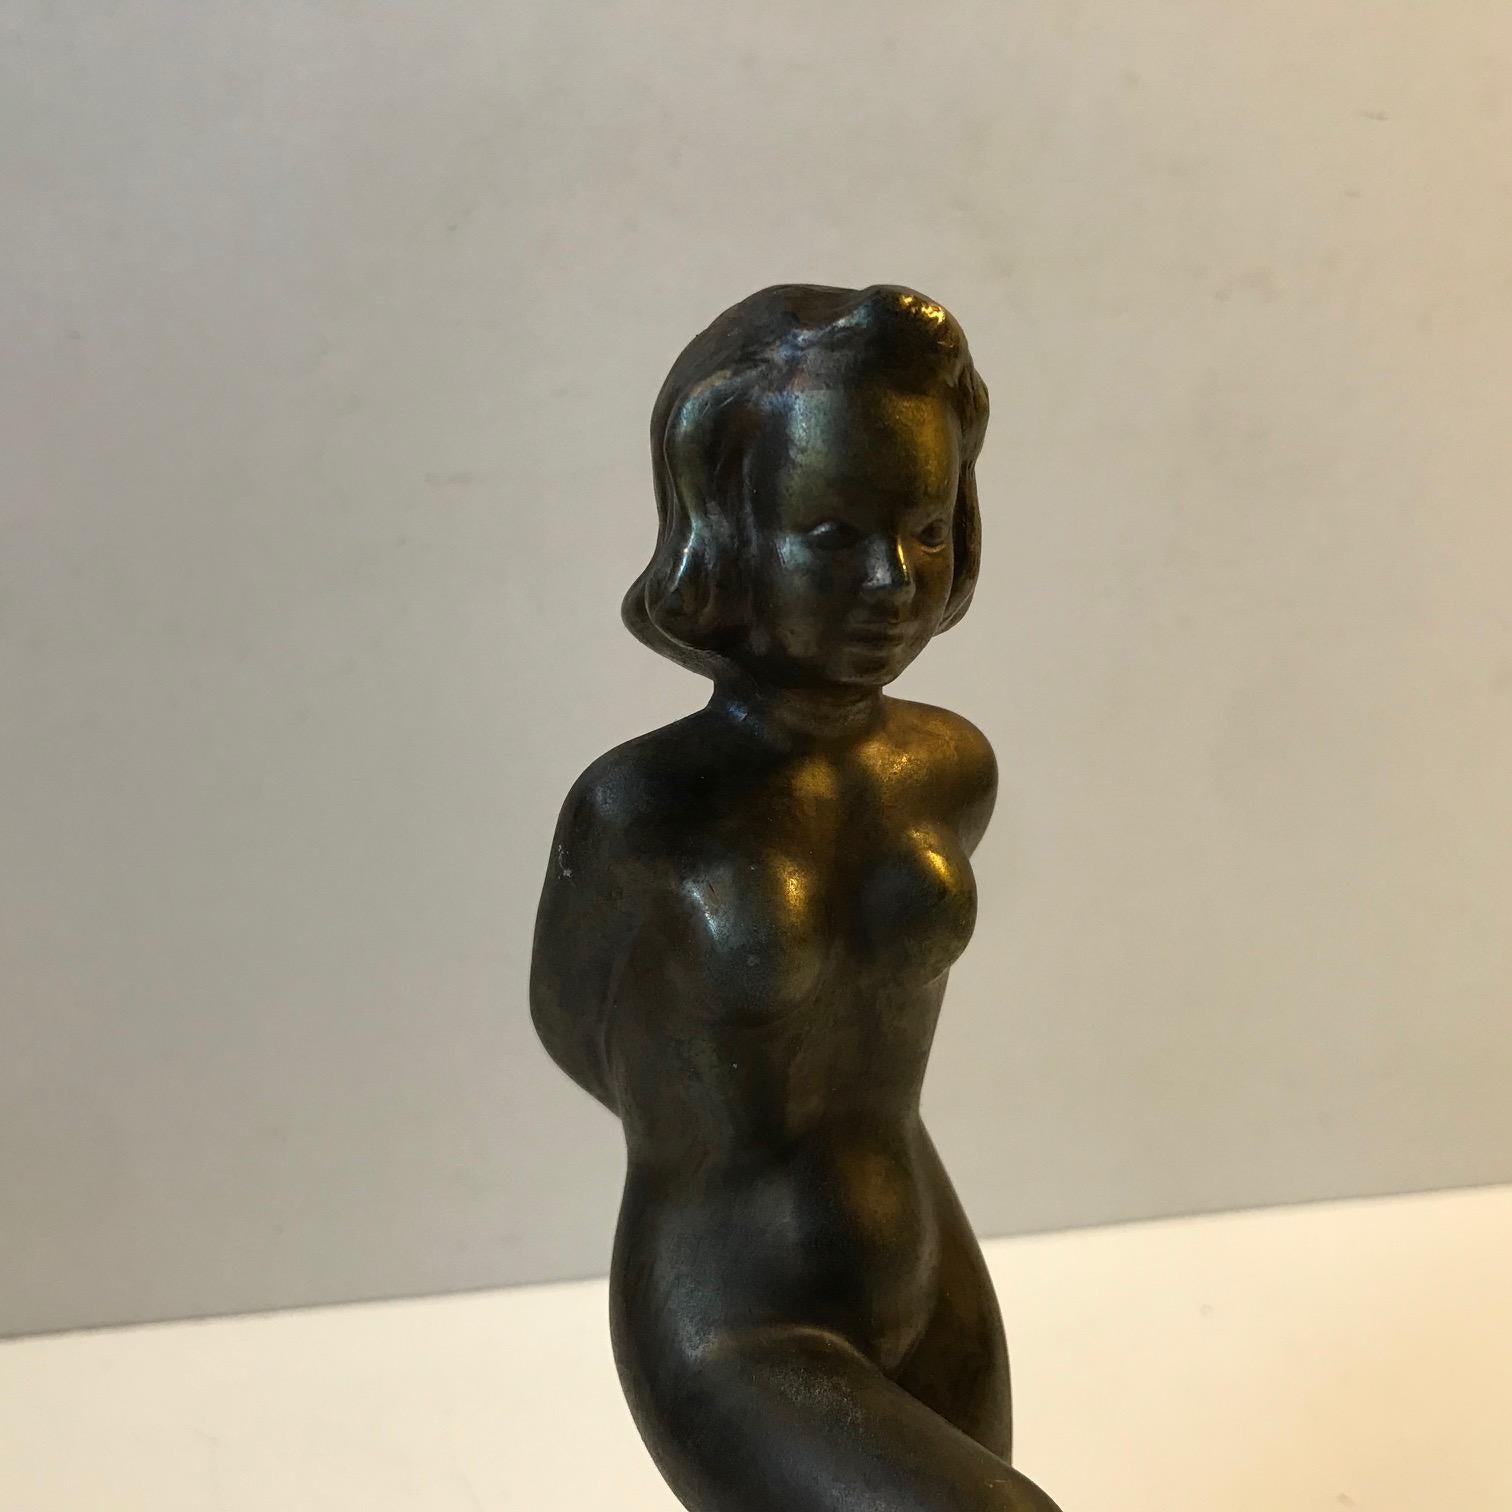 Small bronze sculpture depicting nude female. Made by the Danish artist and sculptor Ove Fritz Rasmussen, (1911-1973). It dates to the late 1940s or early 1950s. It is signed by hand to the 'stone'/base.